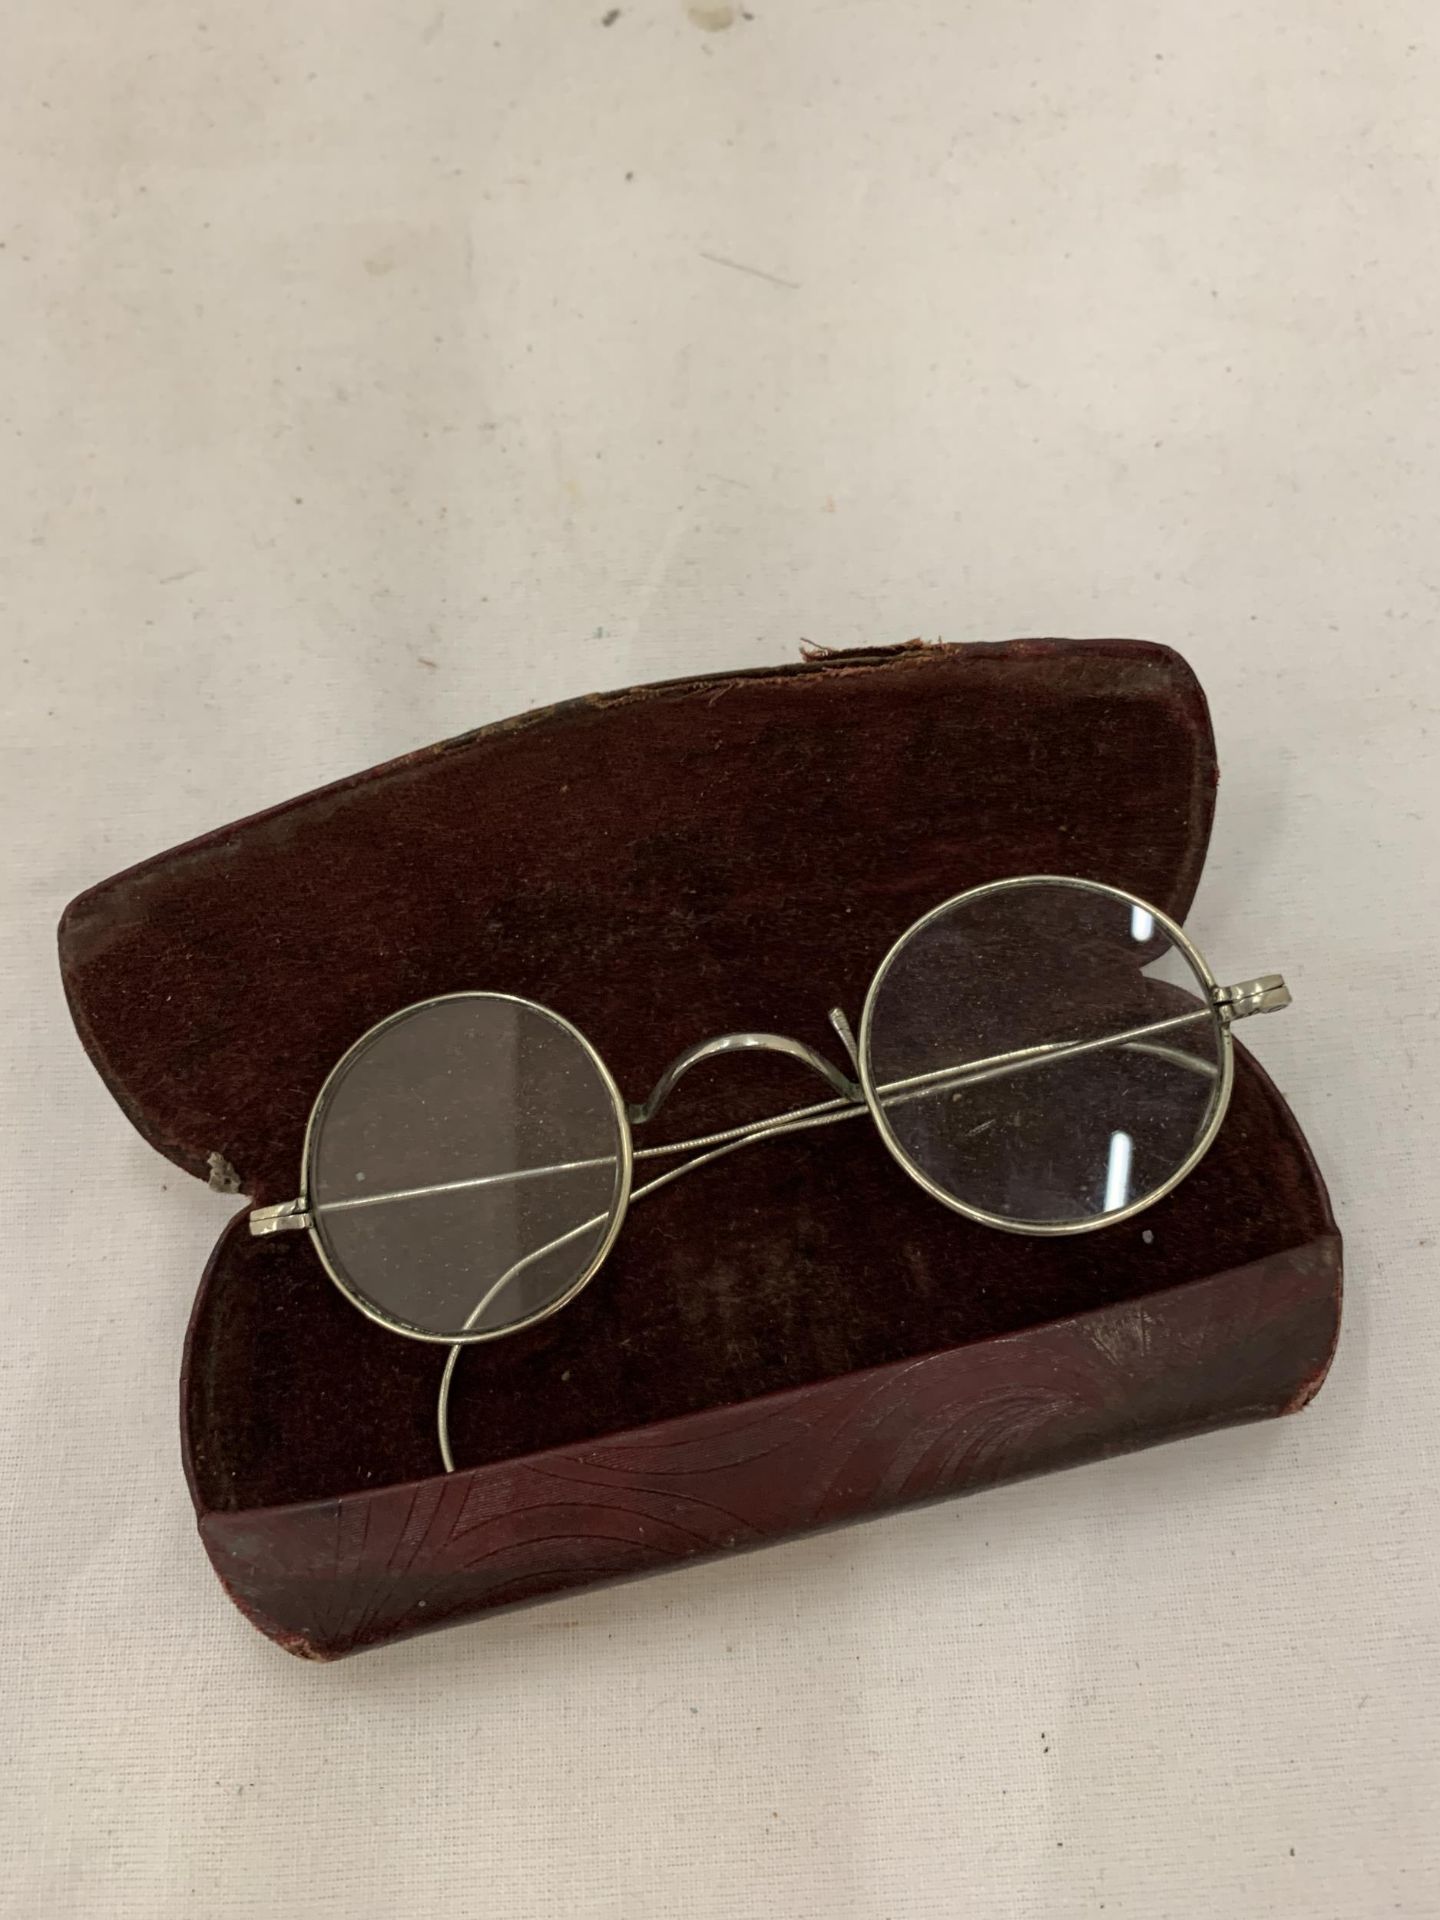 A PAIR OF VICTORIAN SPECTACLES, CASED